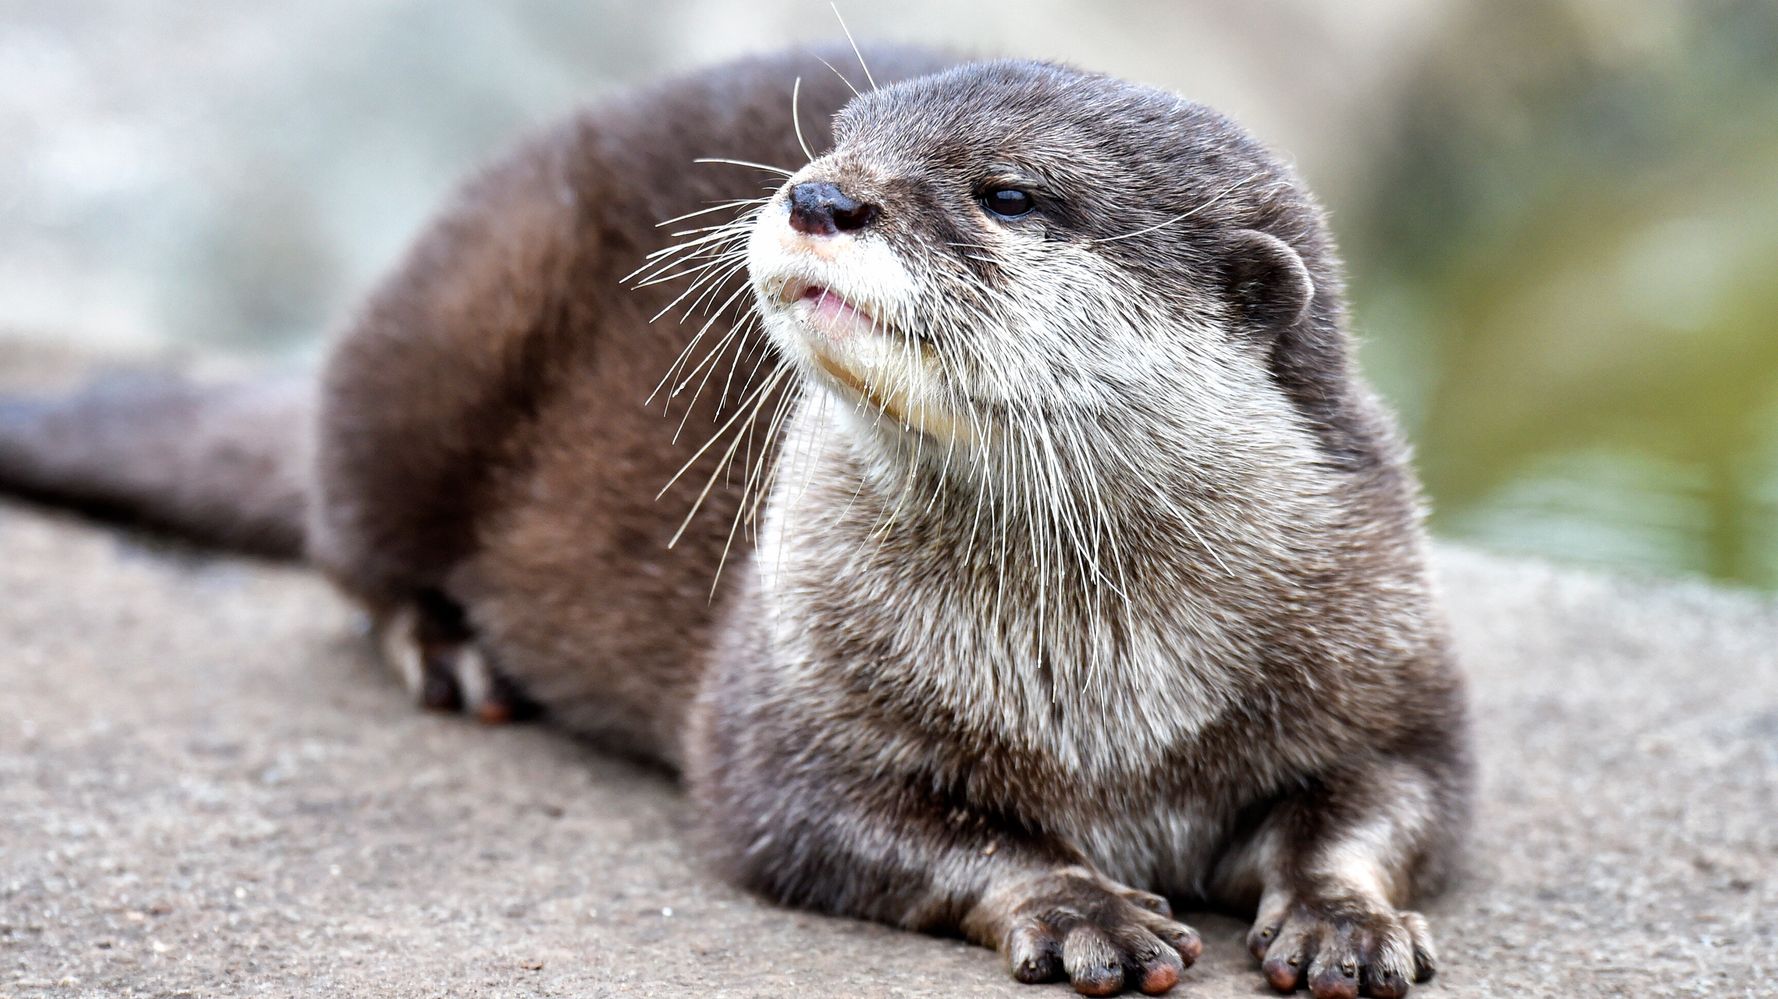 It turns out that otters can also get COVID-19